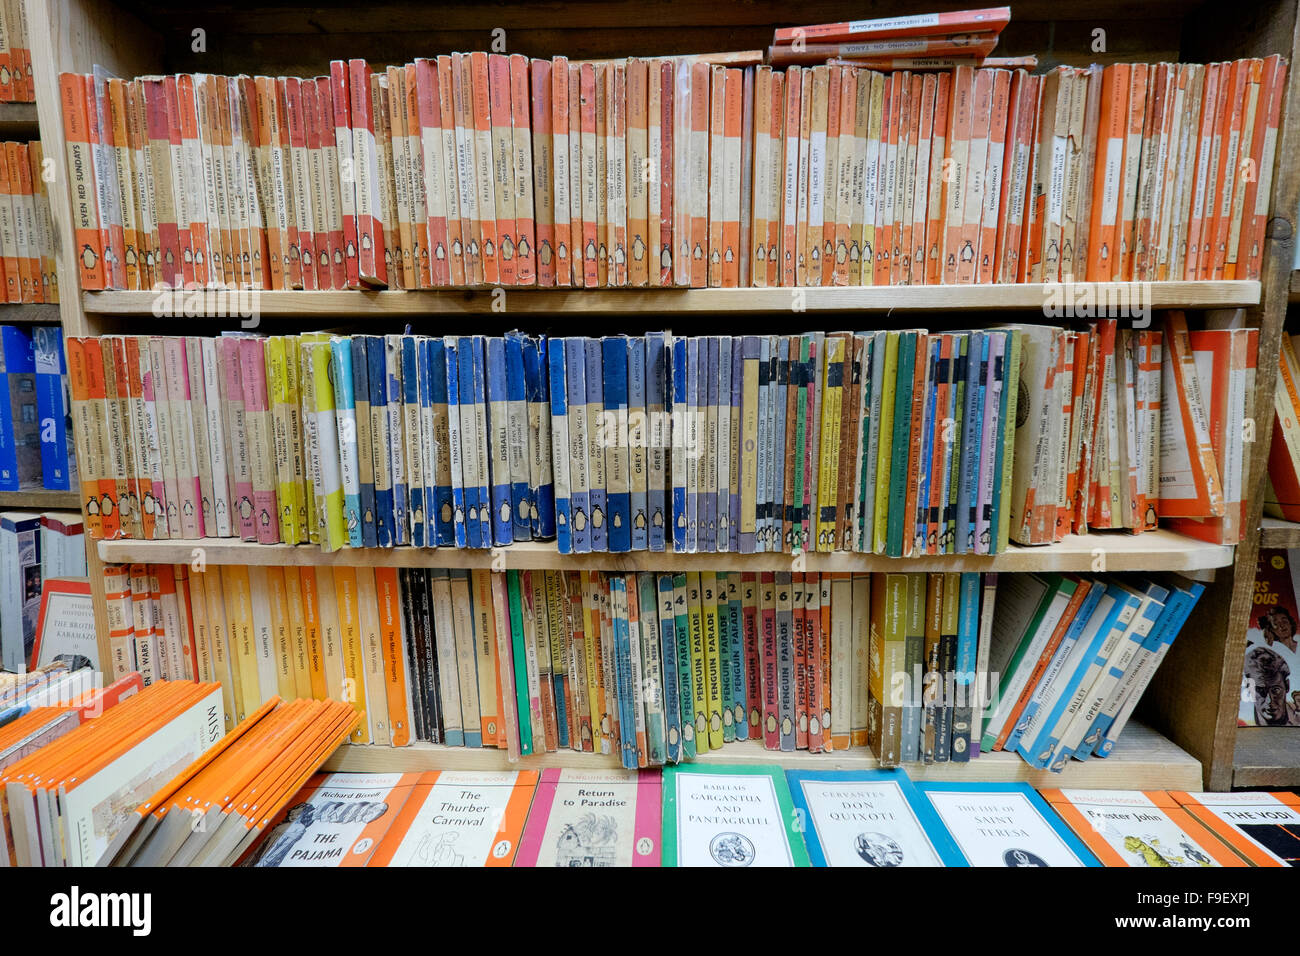 Three bookshelves of vintage Penguin paperbacks colour coded according to content e.g. orange for novels, blue for biographies Stock Photo